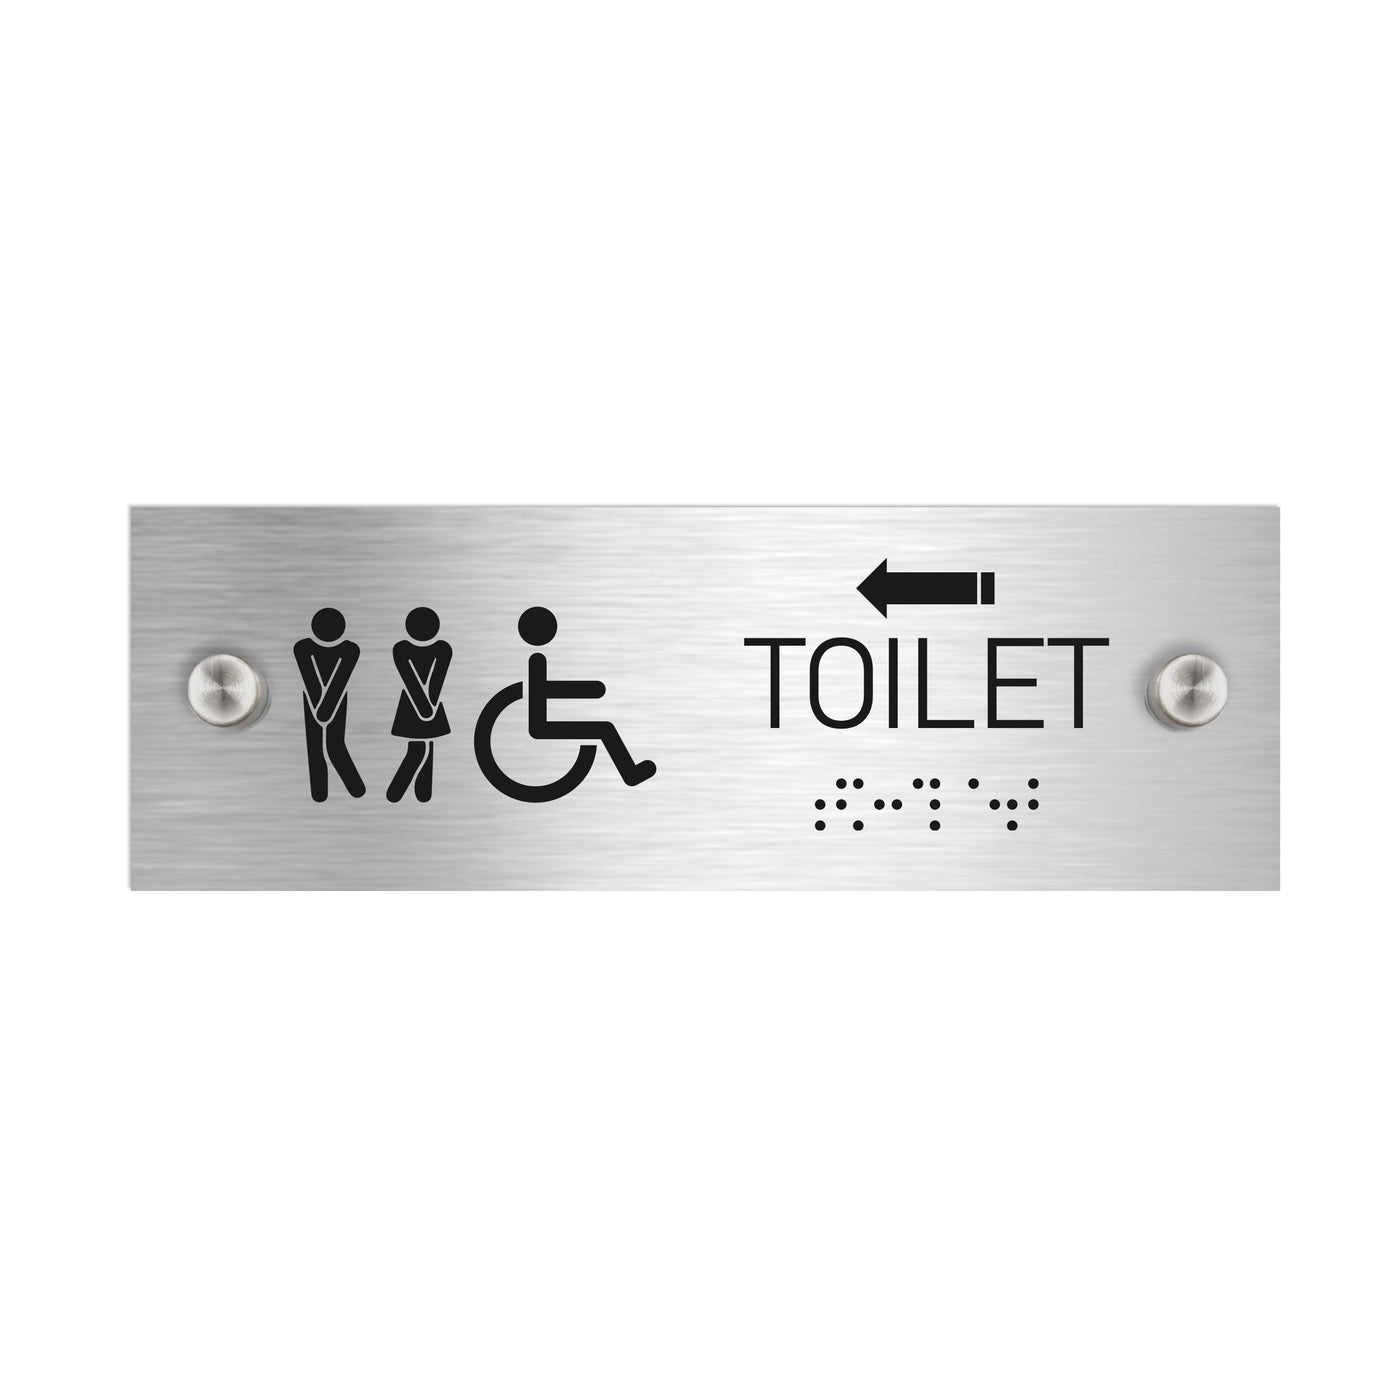 Bathroom Signs - All Gender With Weelchair Toilet Signs With Braille - Stainless Steel